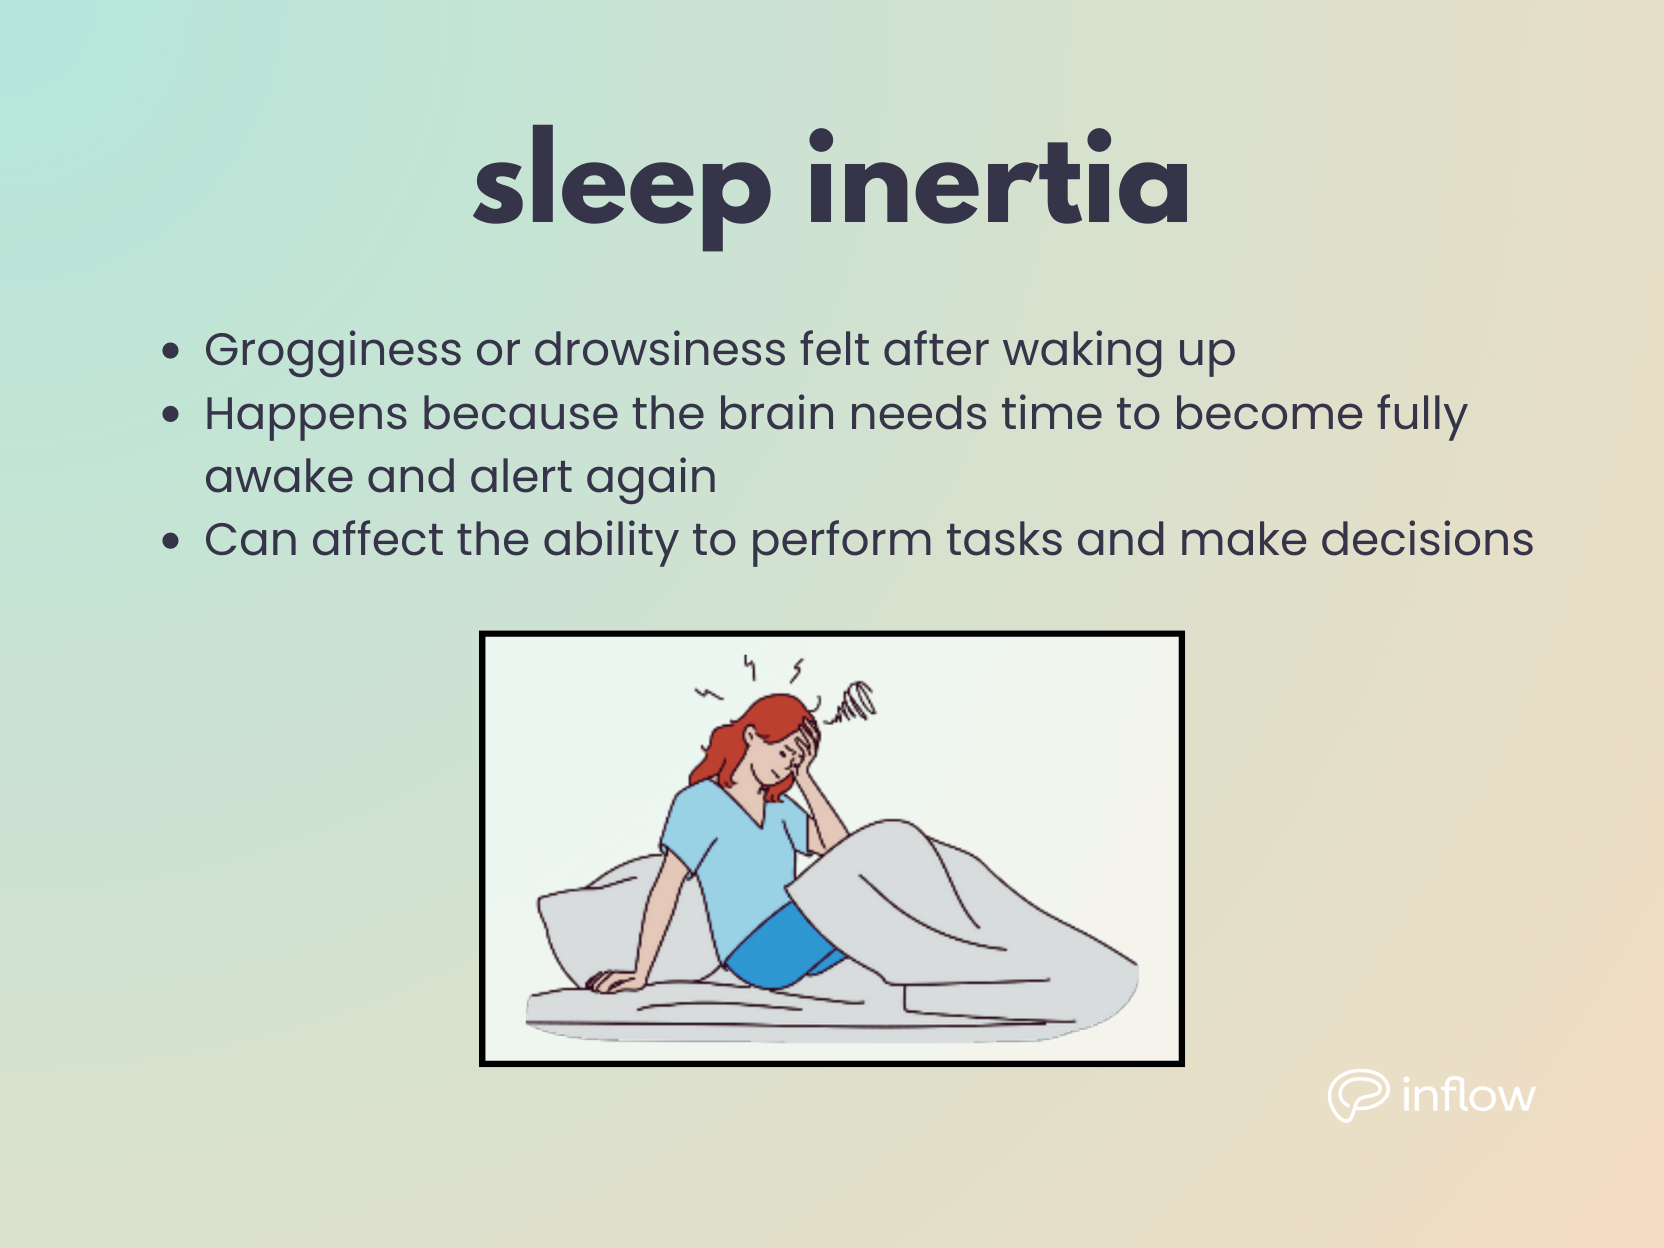 sleep inertia: Grogginess or drowsiness felt after waking up, Happens because the brain needs time to become fully awake and alert again, Can affect the ability to perform tasks and make decisions. image shows a person in bed looking tired.  